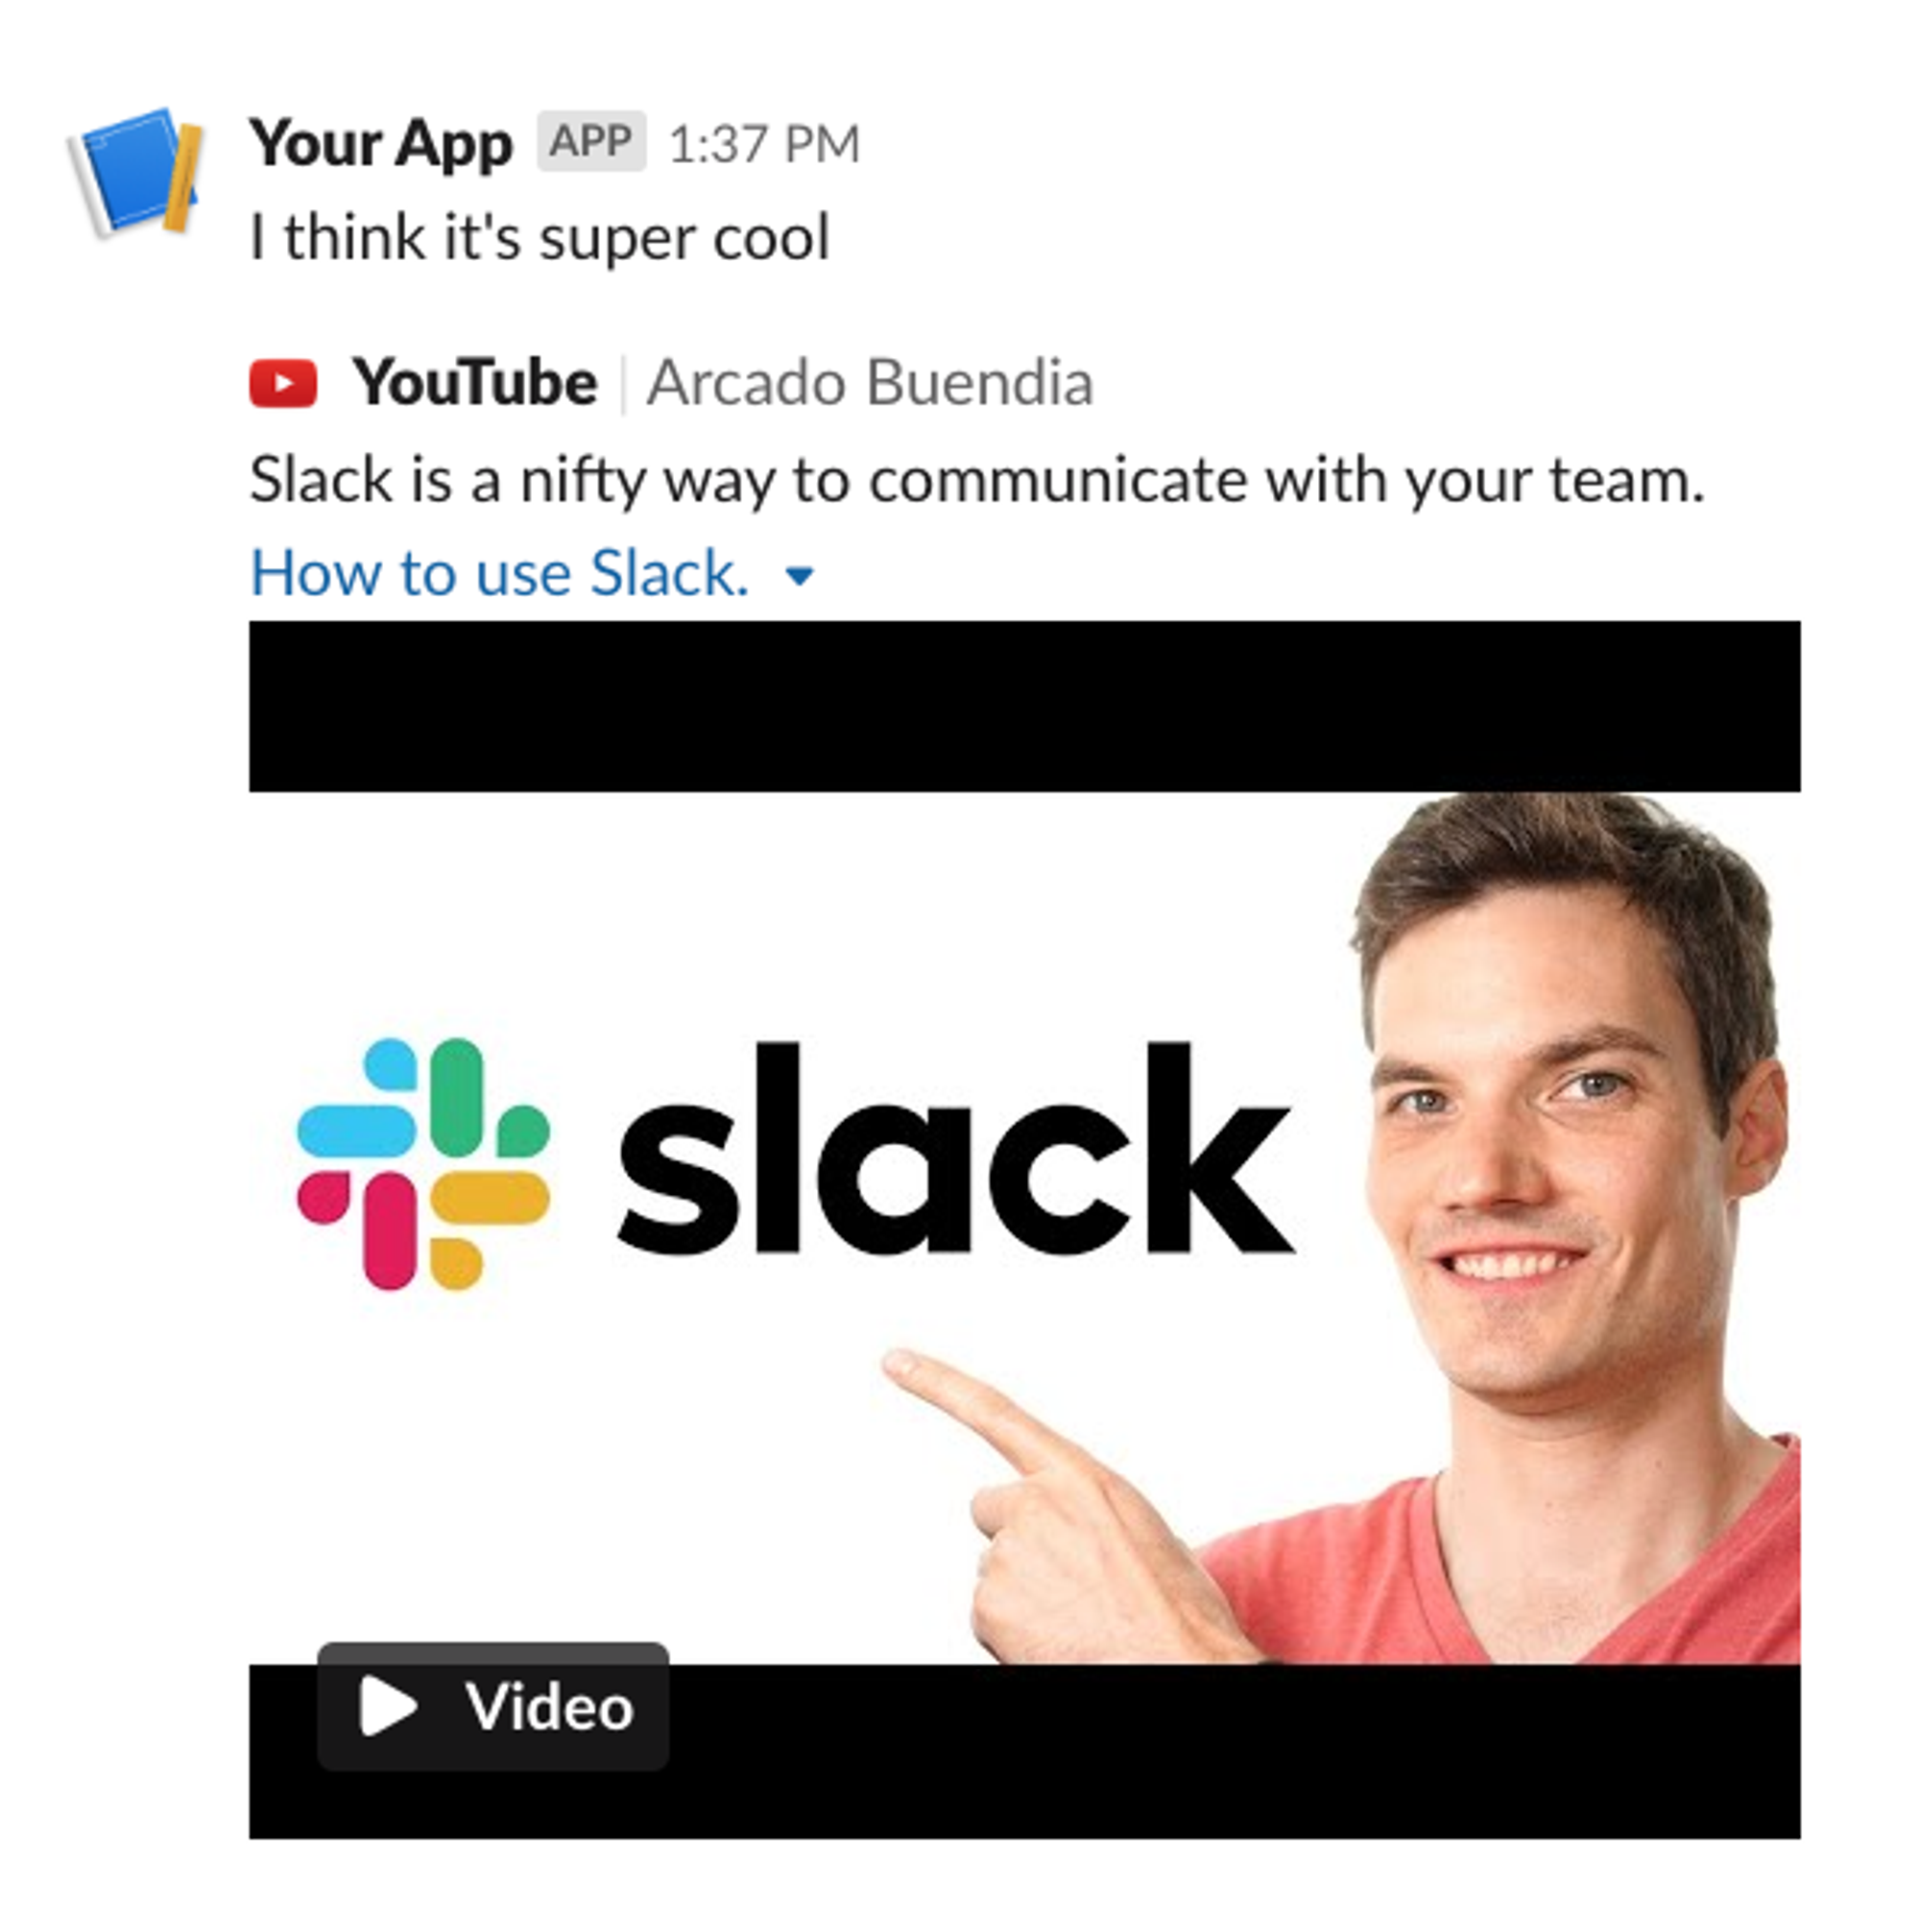 A Slack message with a video